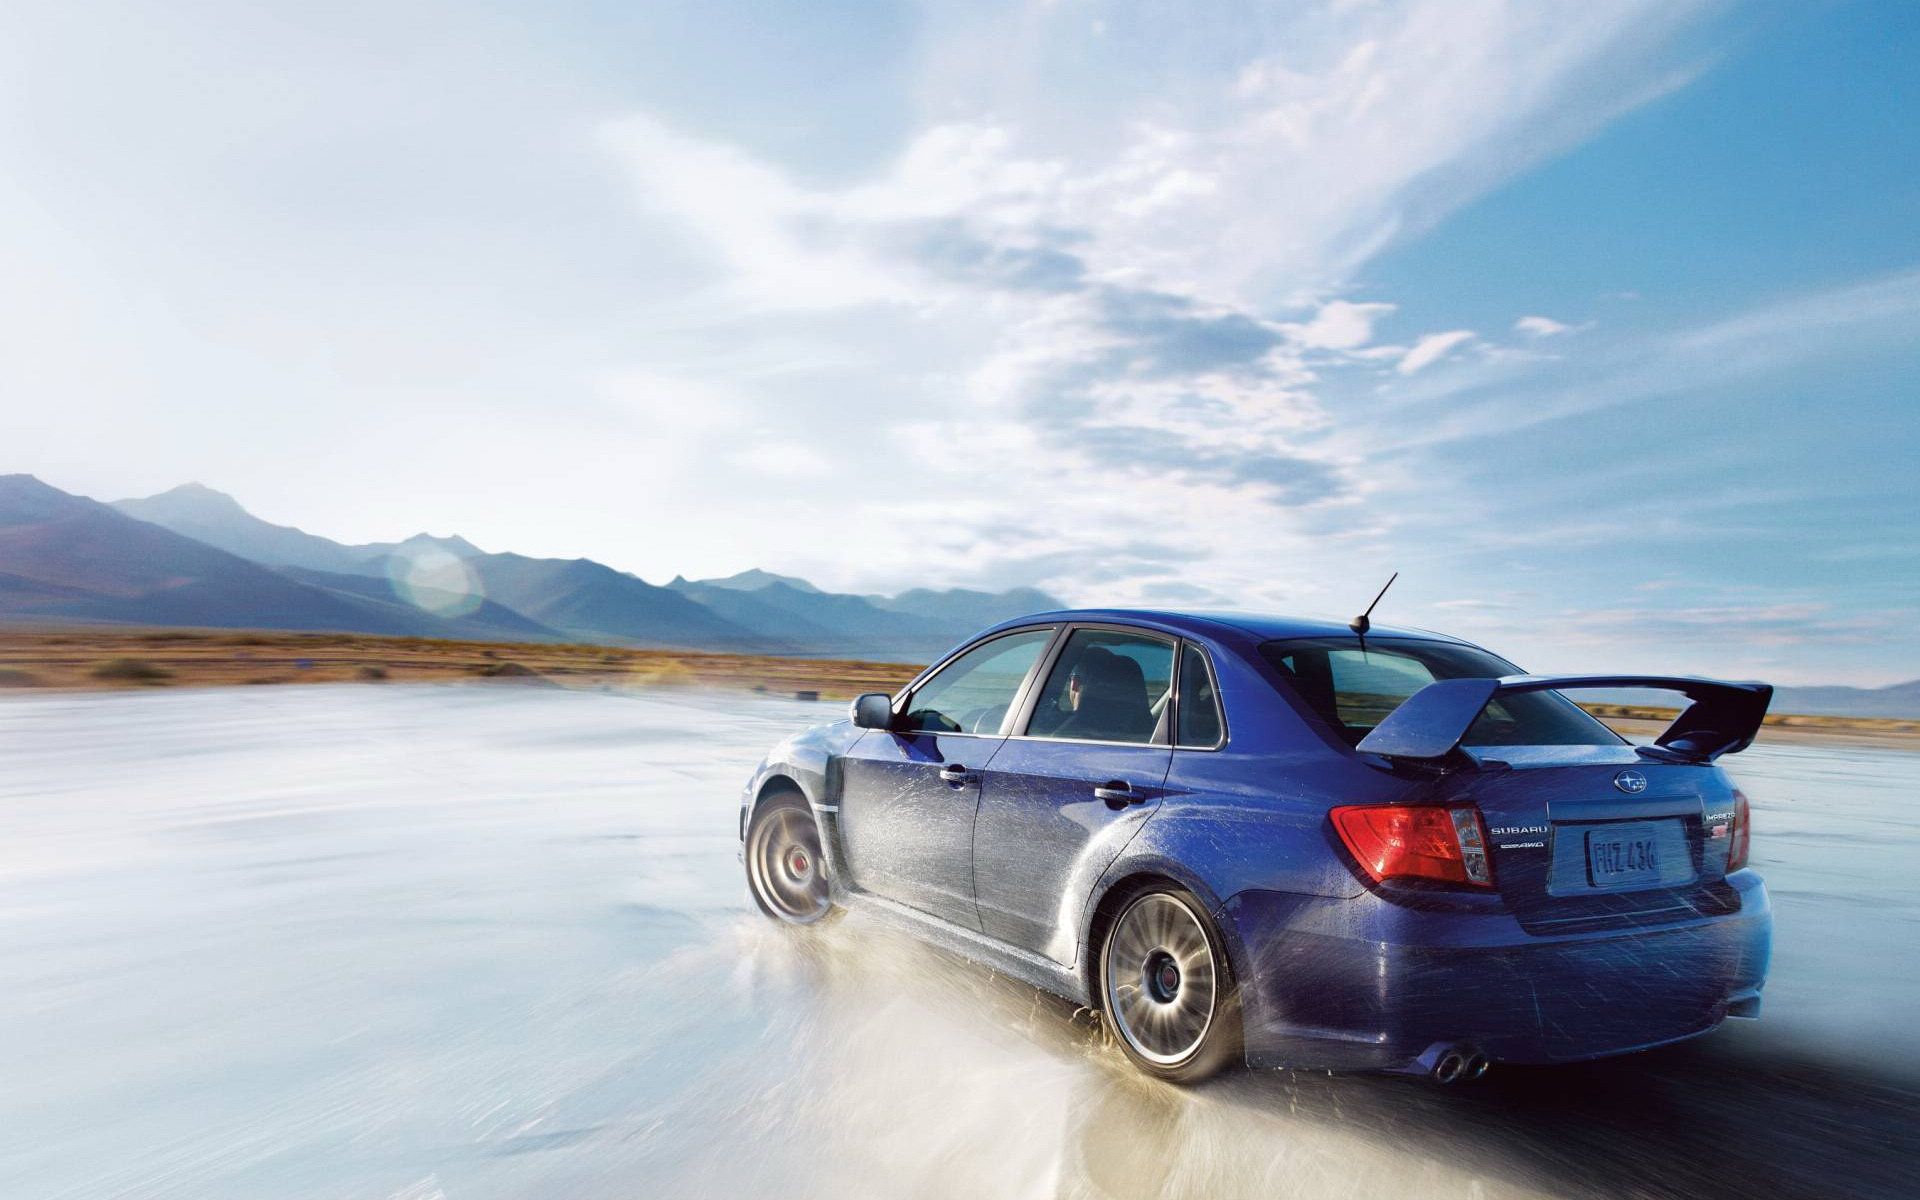 Subaru HD Wallpapers and Backgrounds sorted by rating